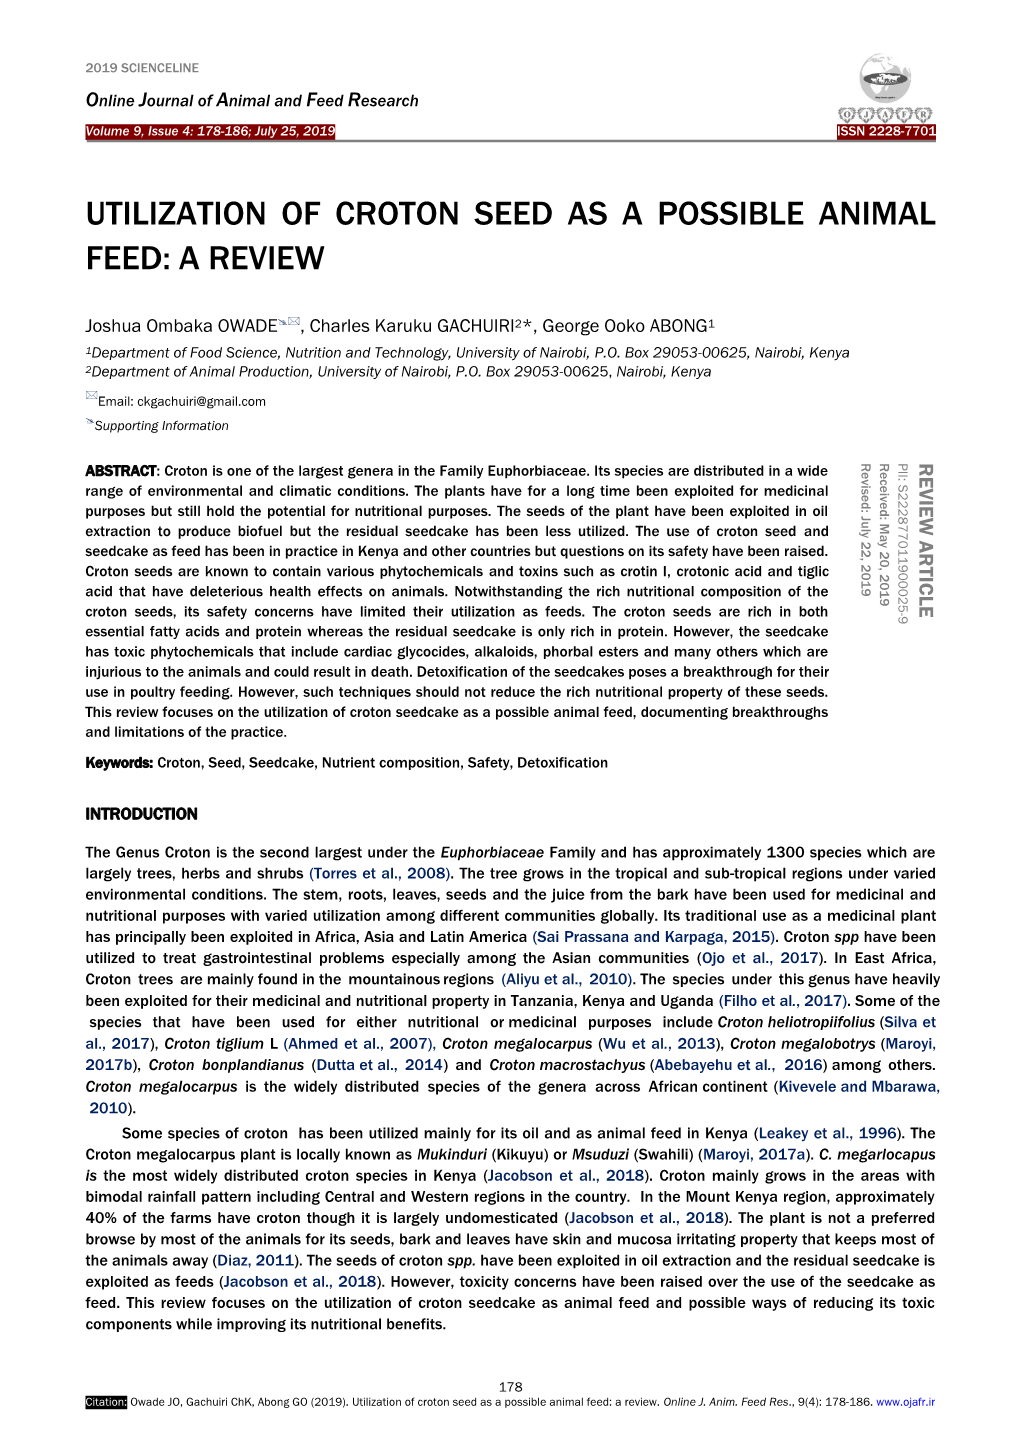 Utilization of Croton Seed As a Possible Animal Feed: a Review. Online J. Anim. Feed Res., 9(4): 178-186